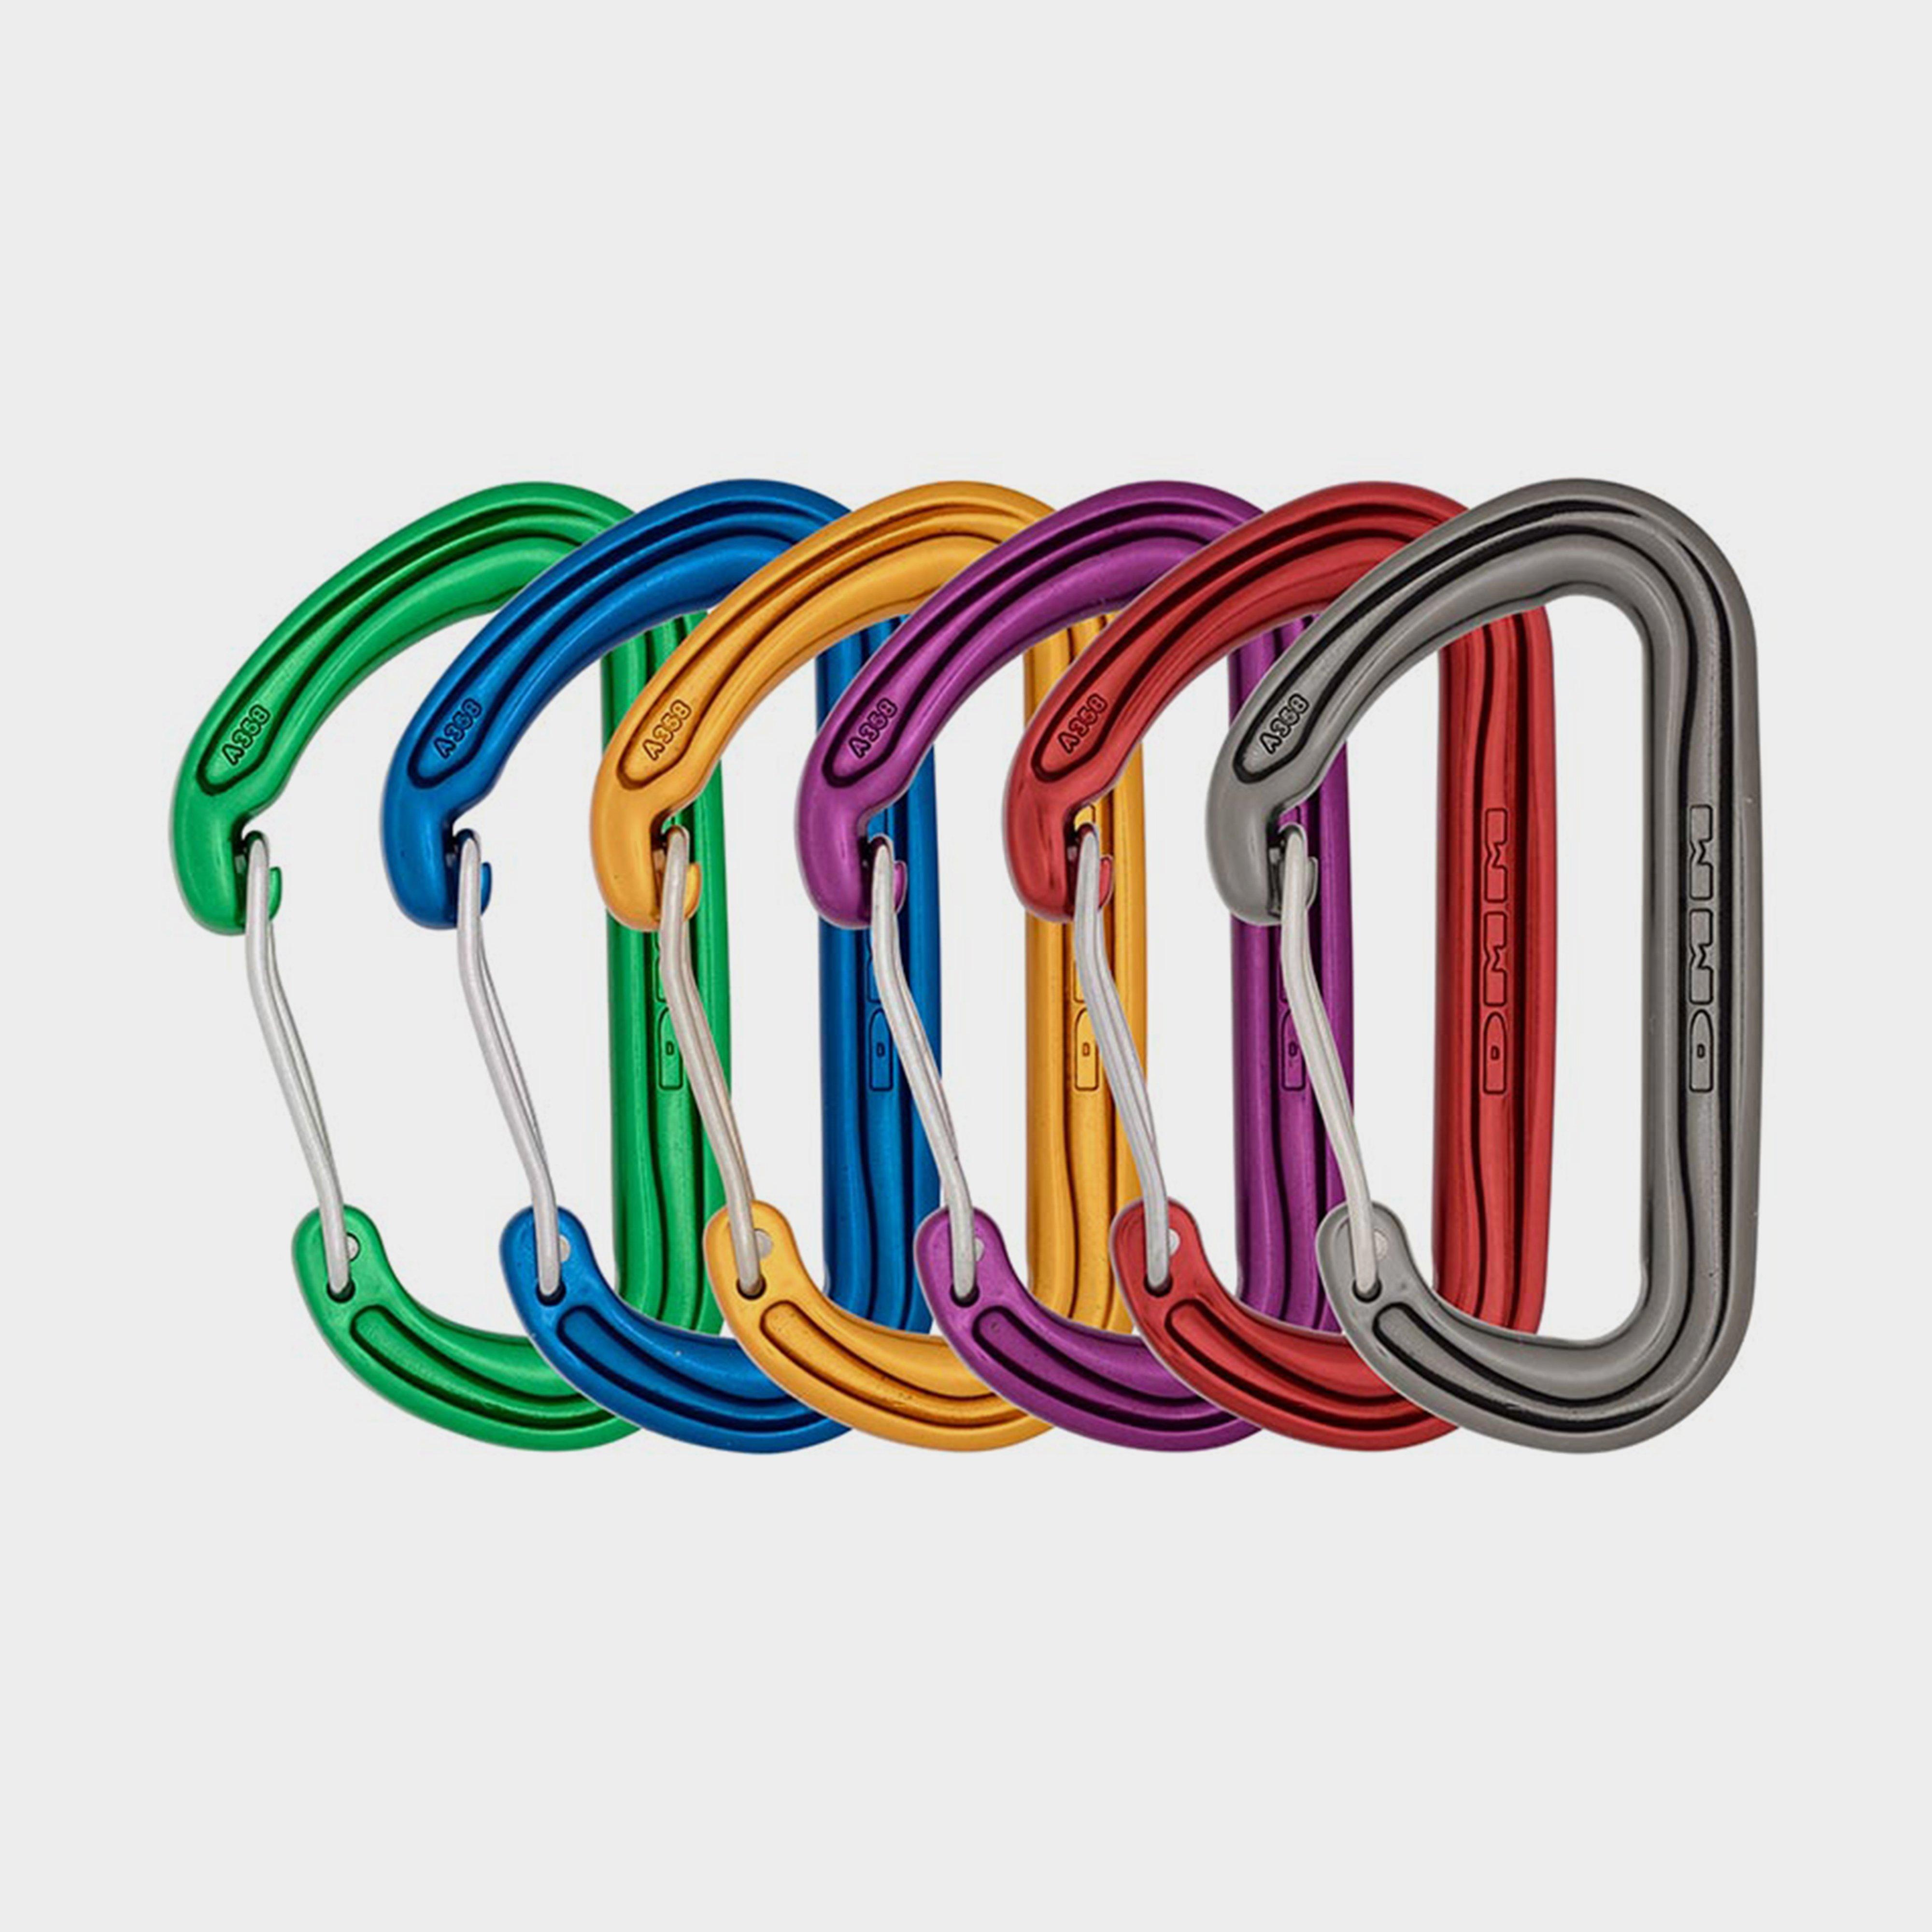 dmm Dmm Spectre Quickdraw 2 (Six Pack) - Multi-Coloured, Multi-coloured